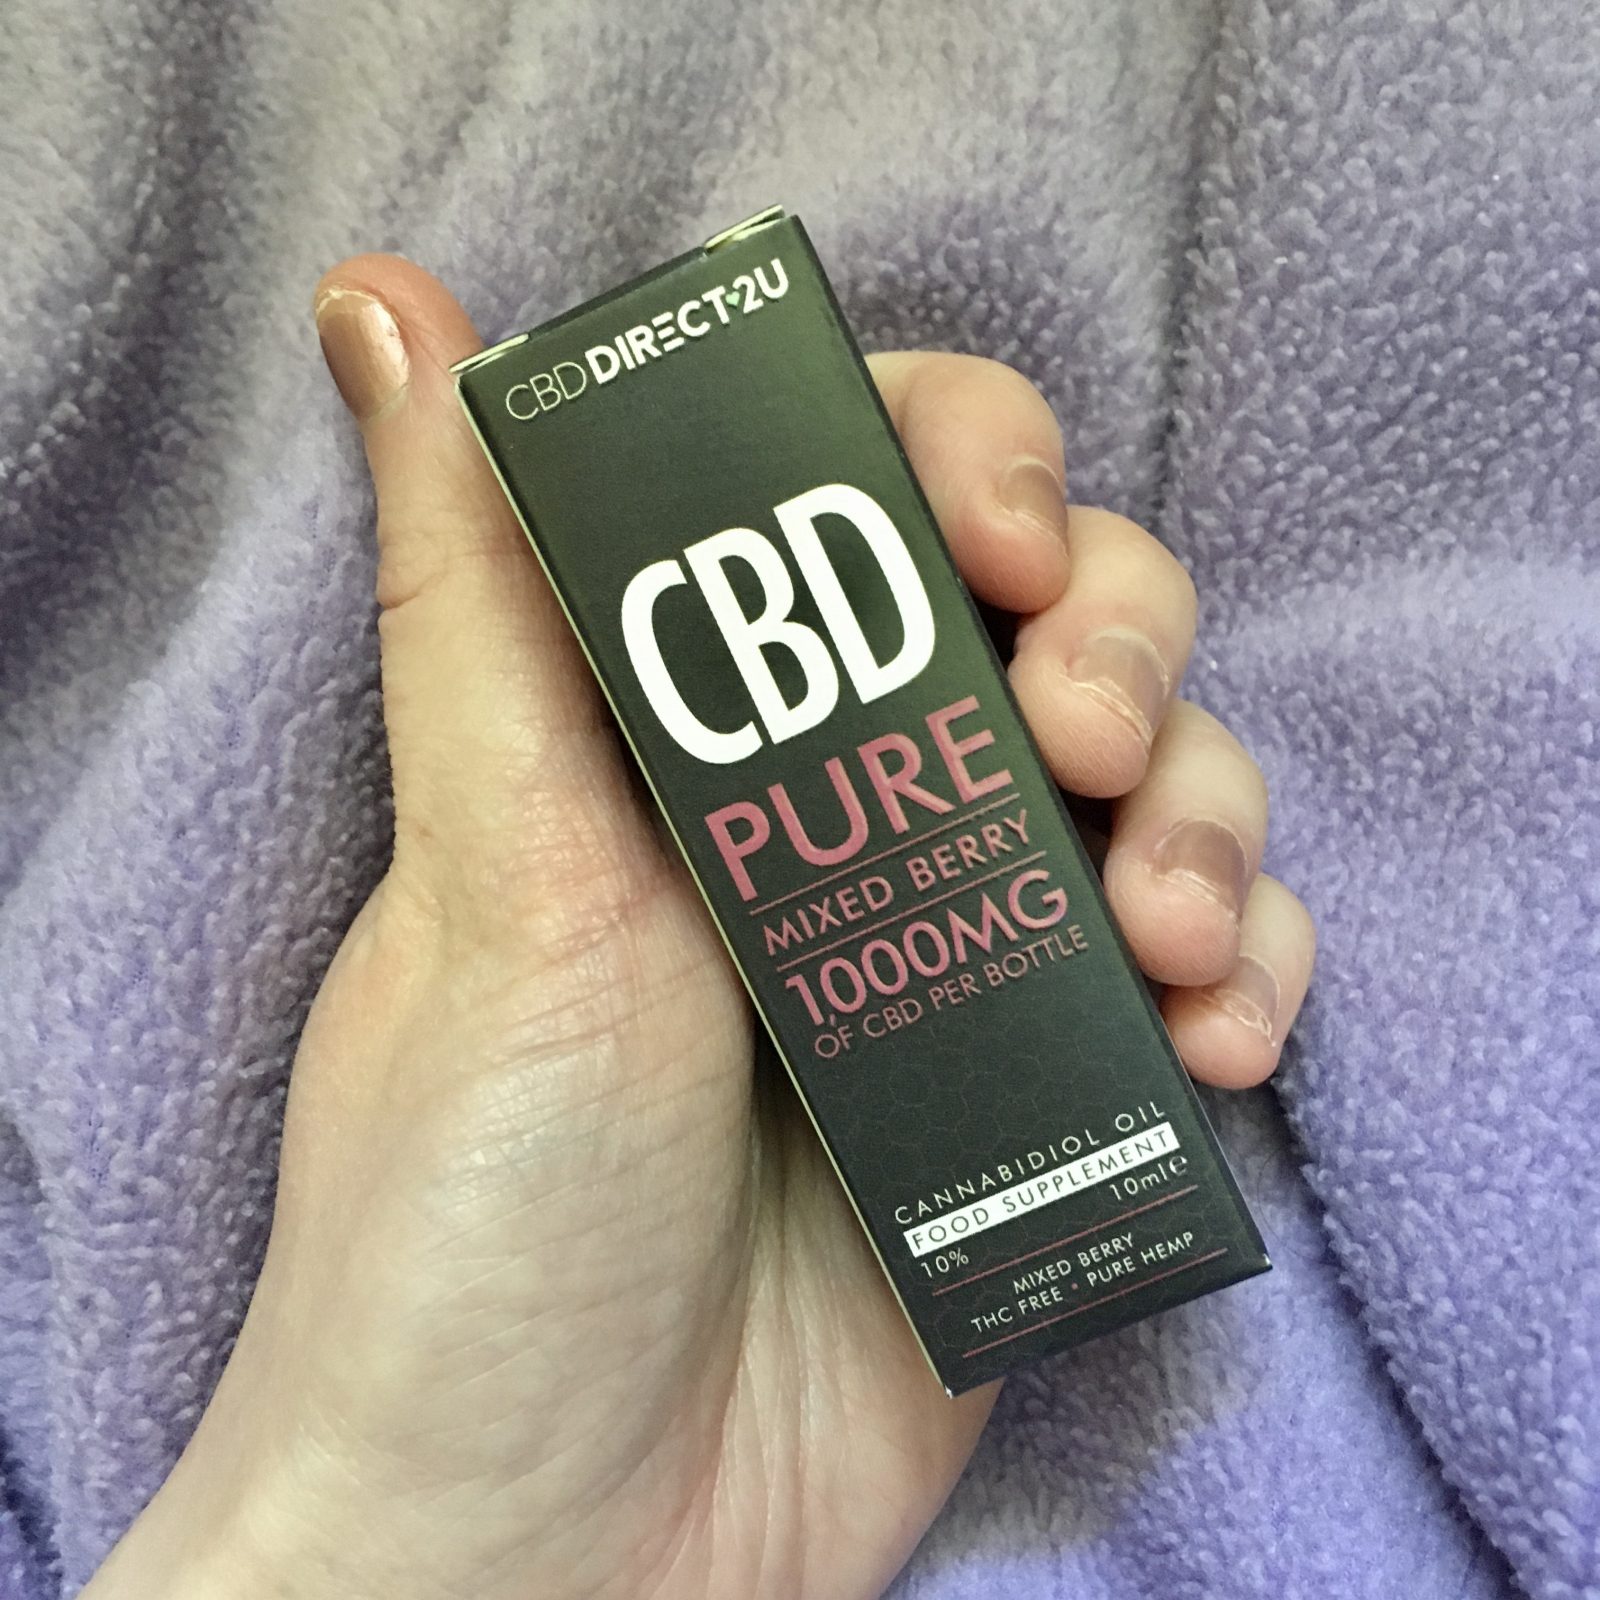 hand holding cbd in outer cardboard box packaging (black with white lettering), with purple blanket in background